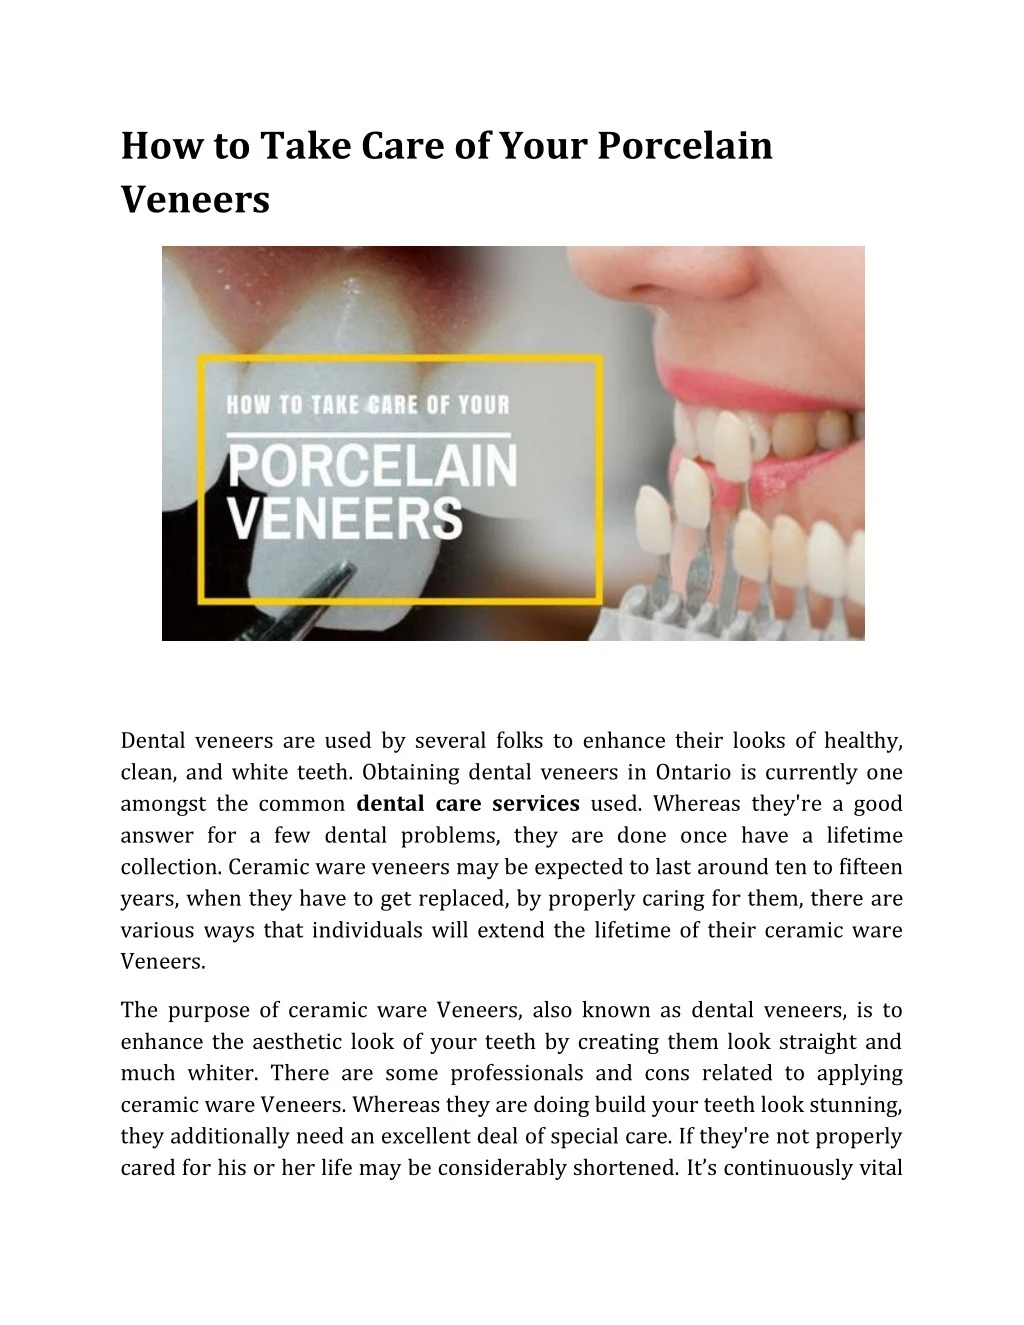 how to take care of your porcelain veneers